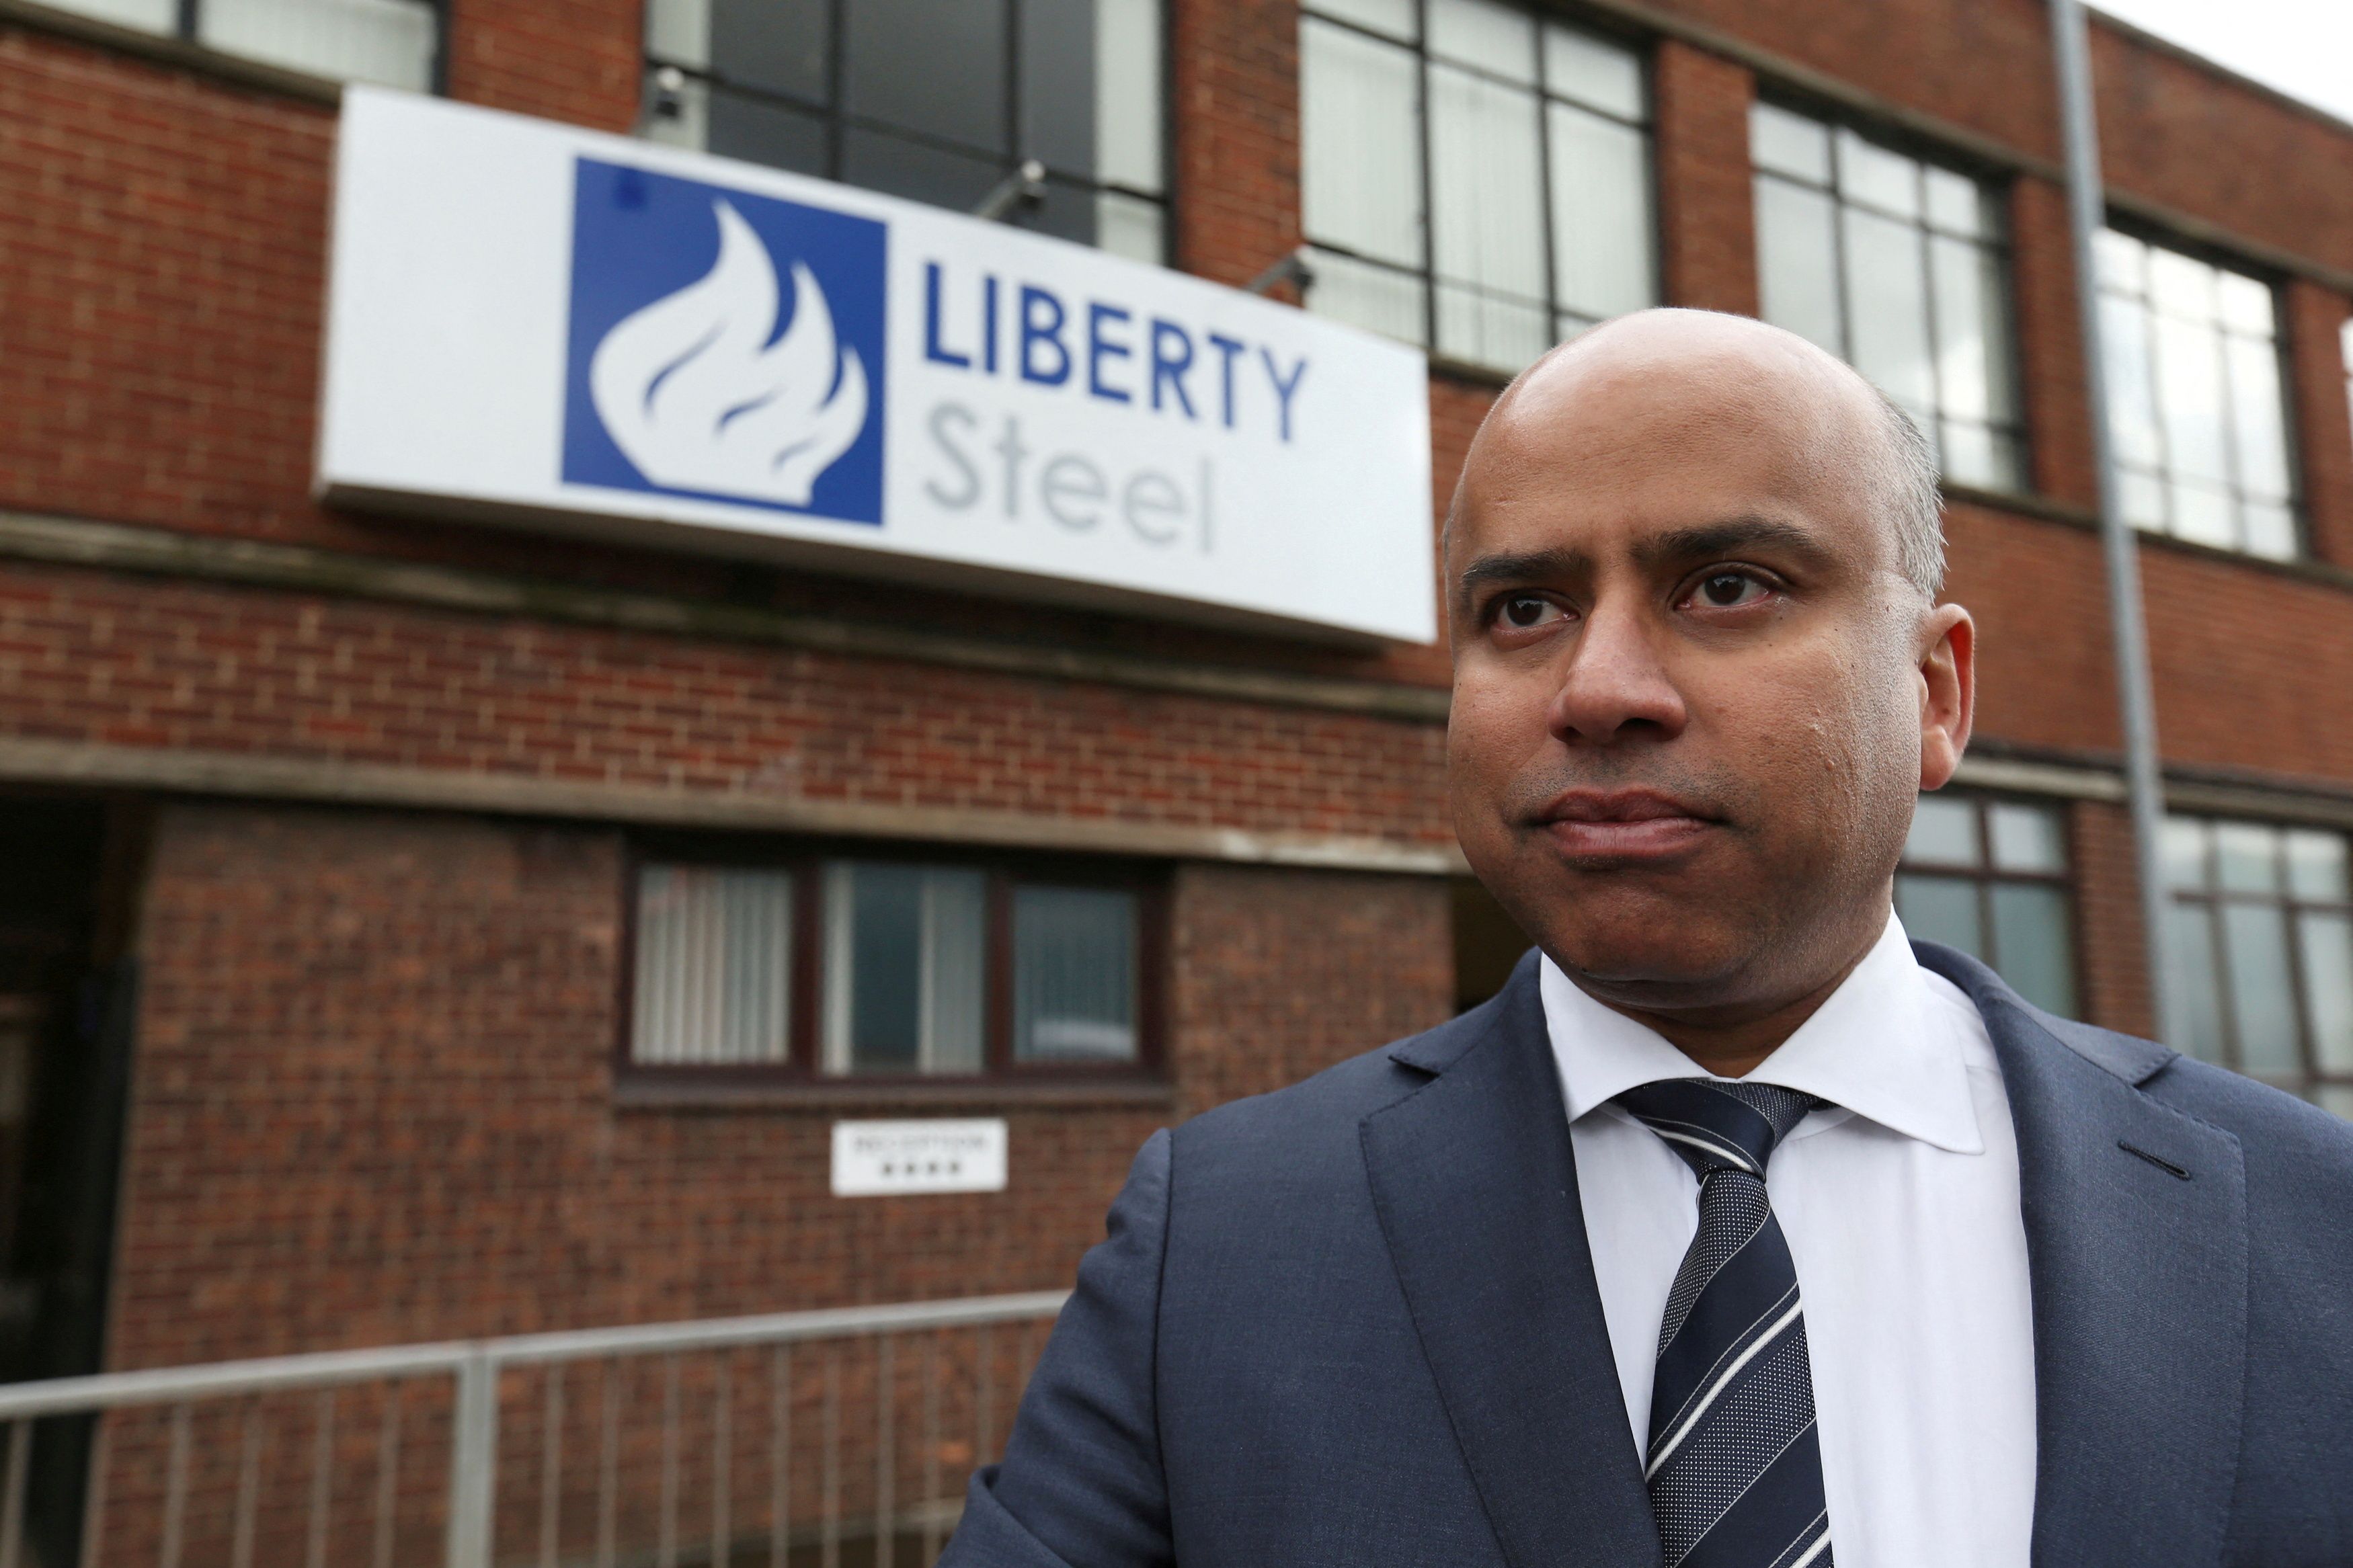 Liberty Steel boss Sanjeev Gupta stands outside steel pressing mill in Dalzell after completing its purchase, Scotland, Britain